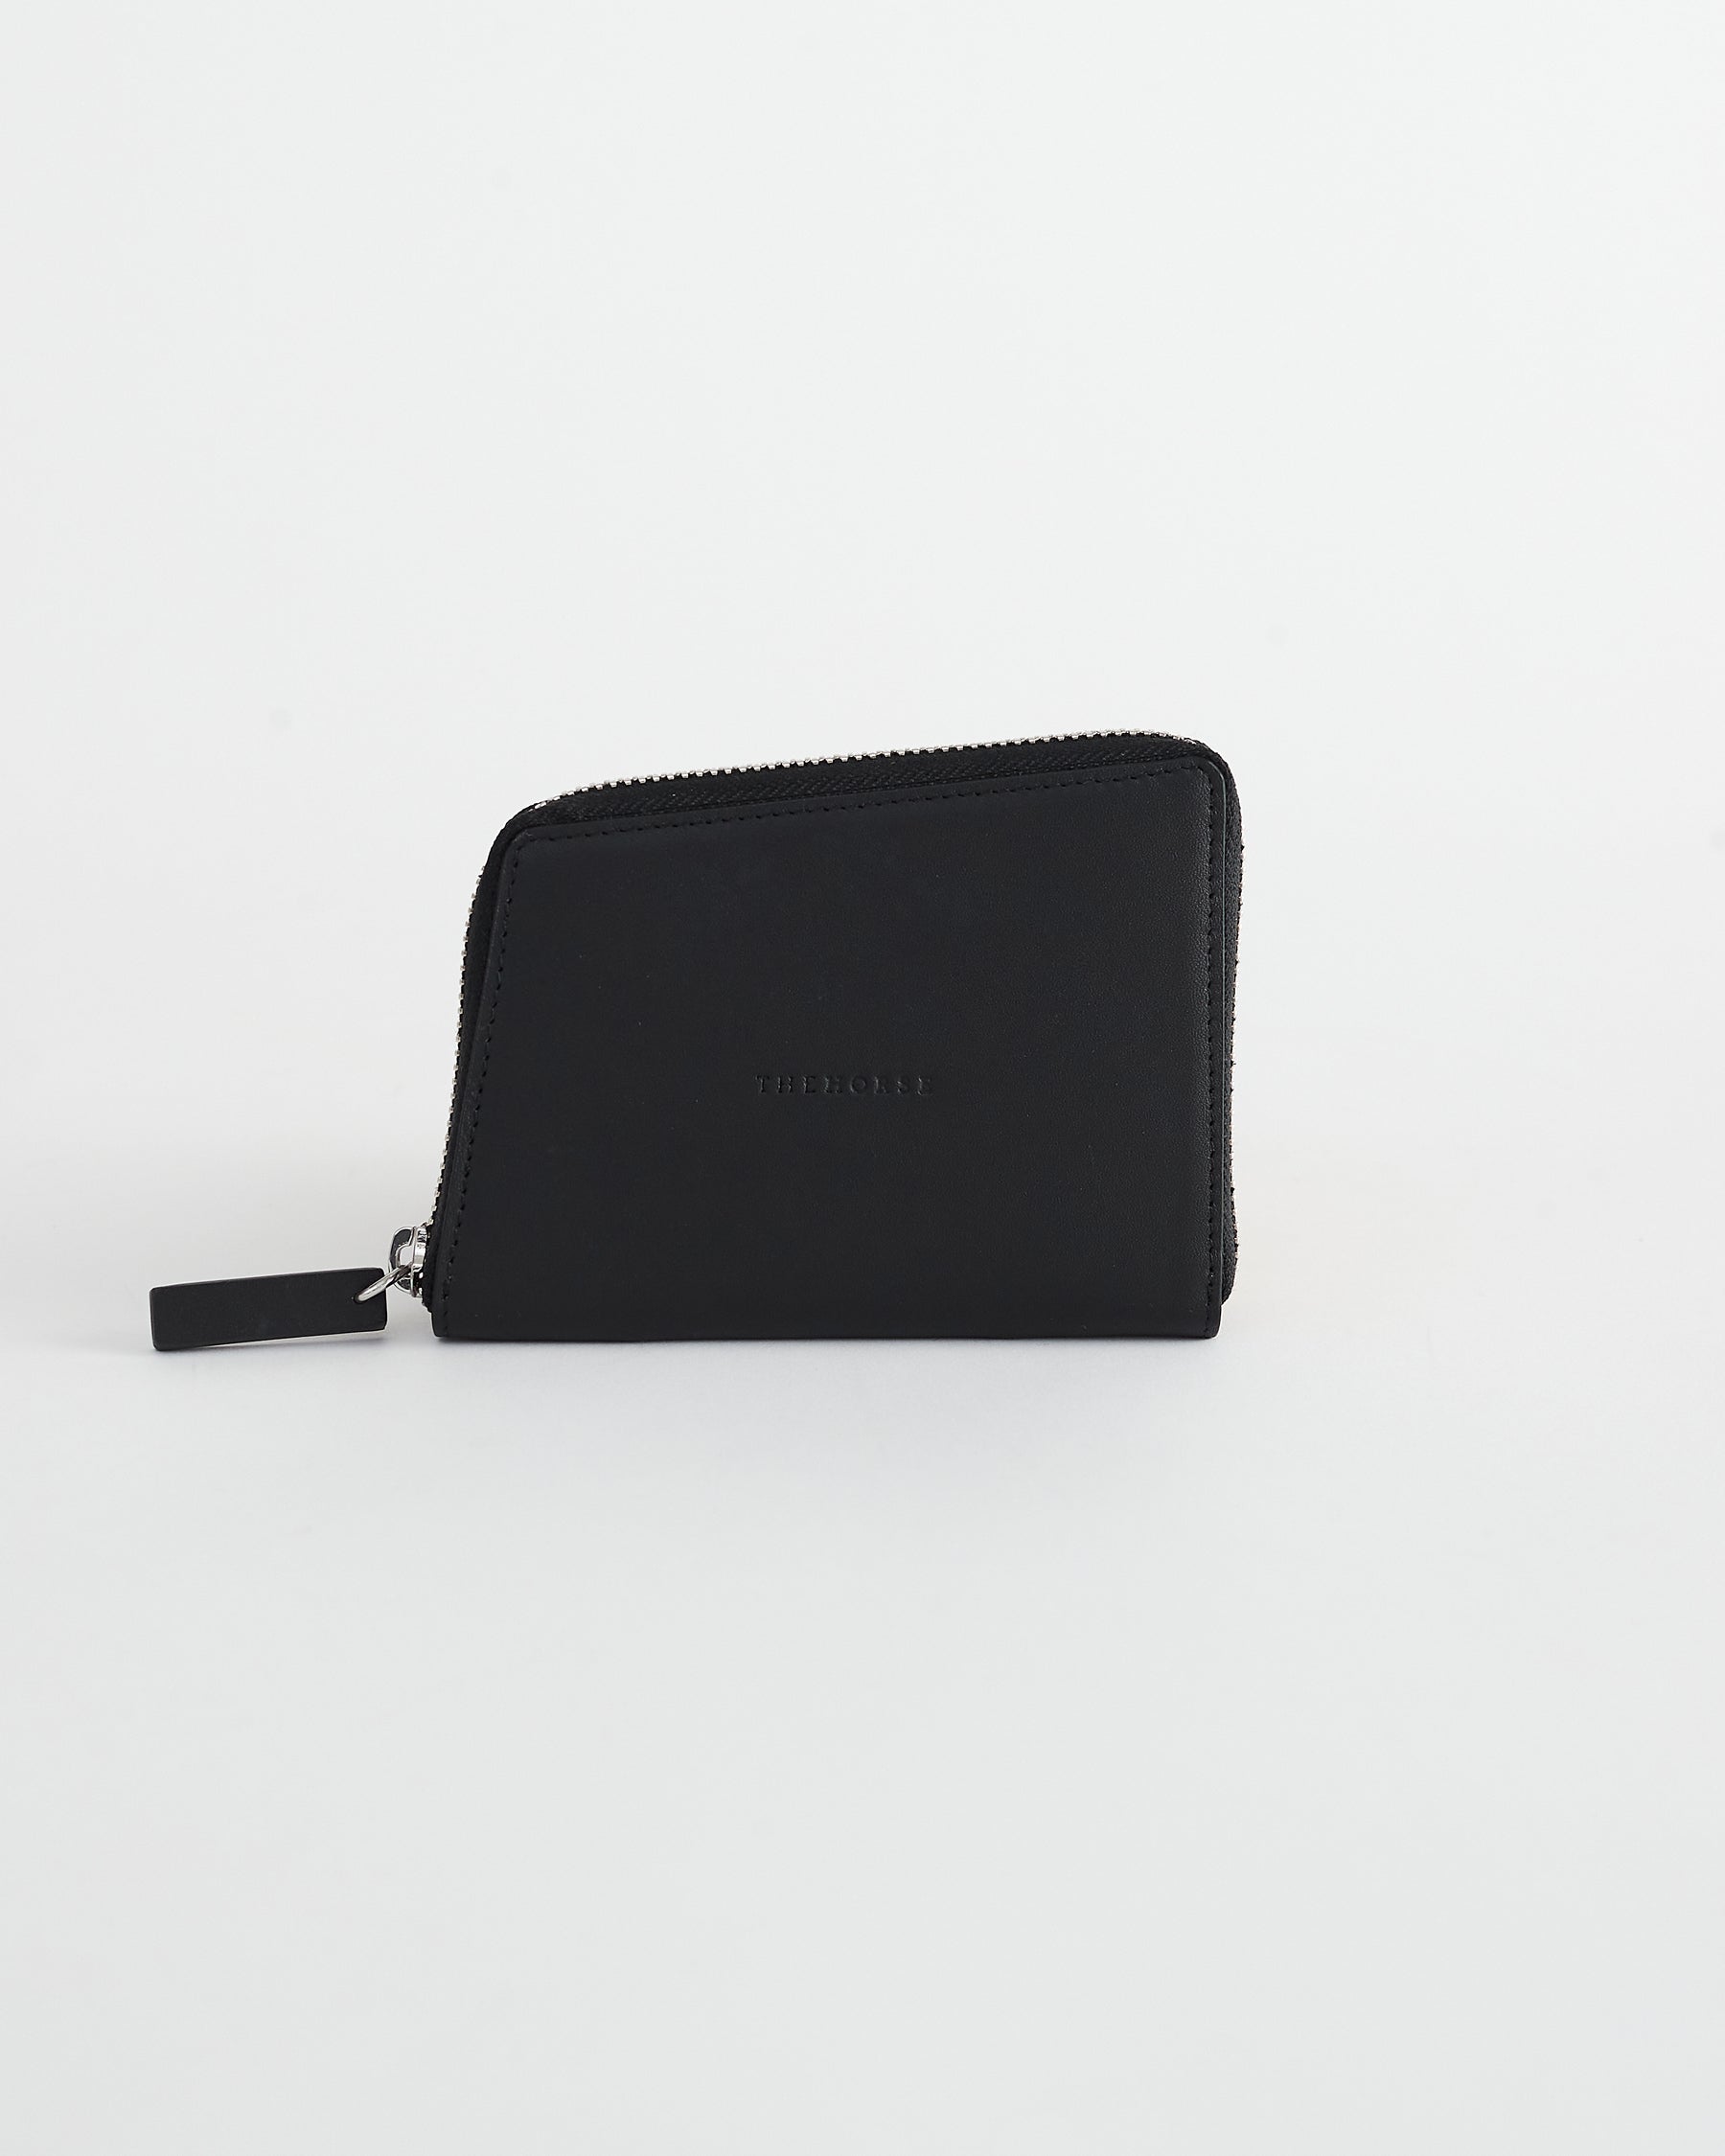 The Bo Women's Compact Leather Zip Wallet in Black by The Horse®